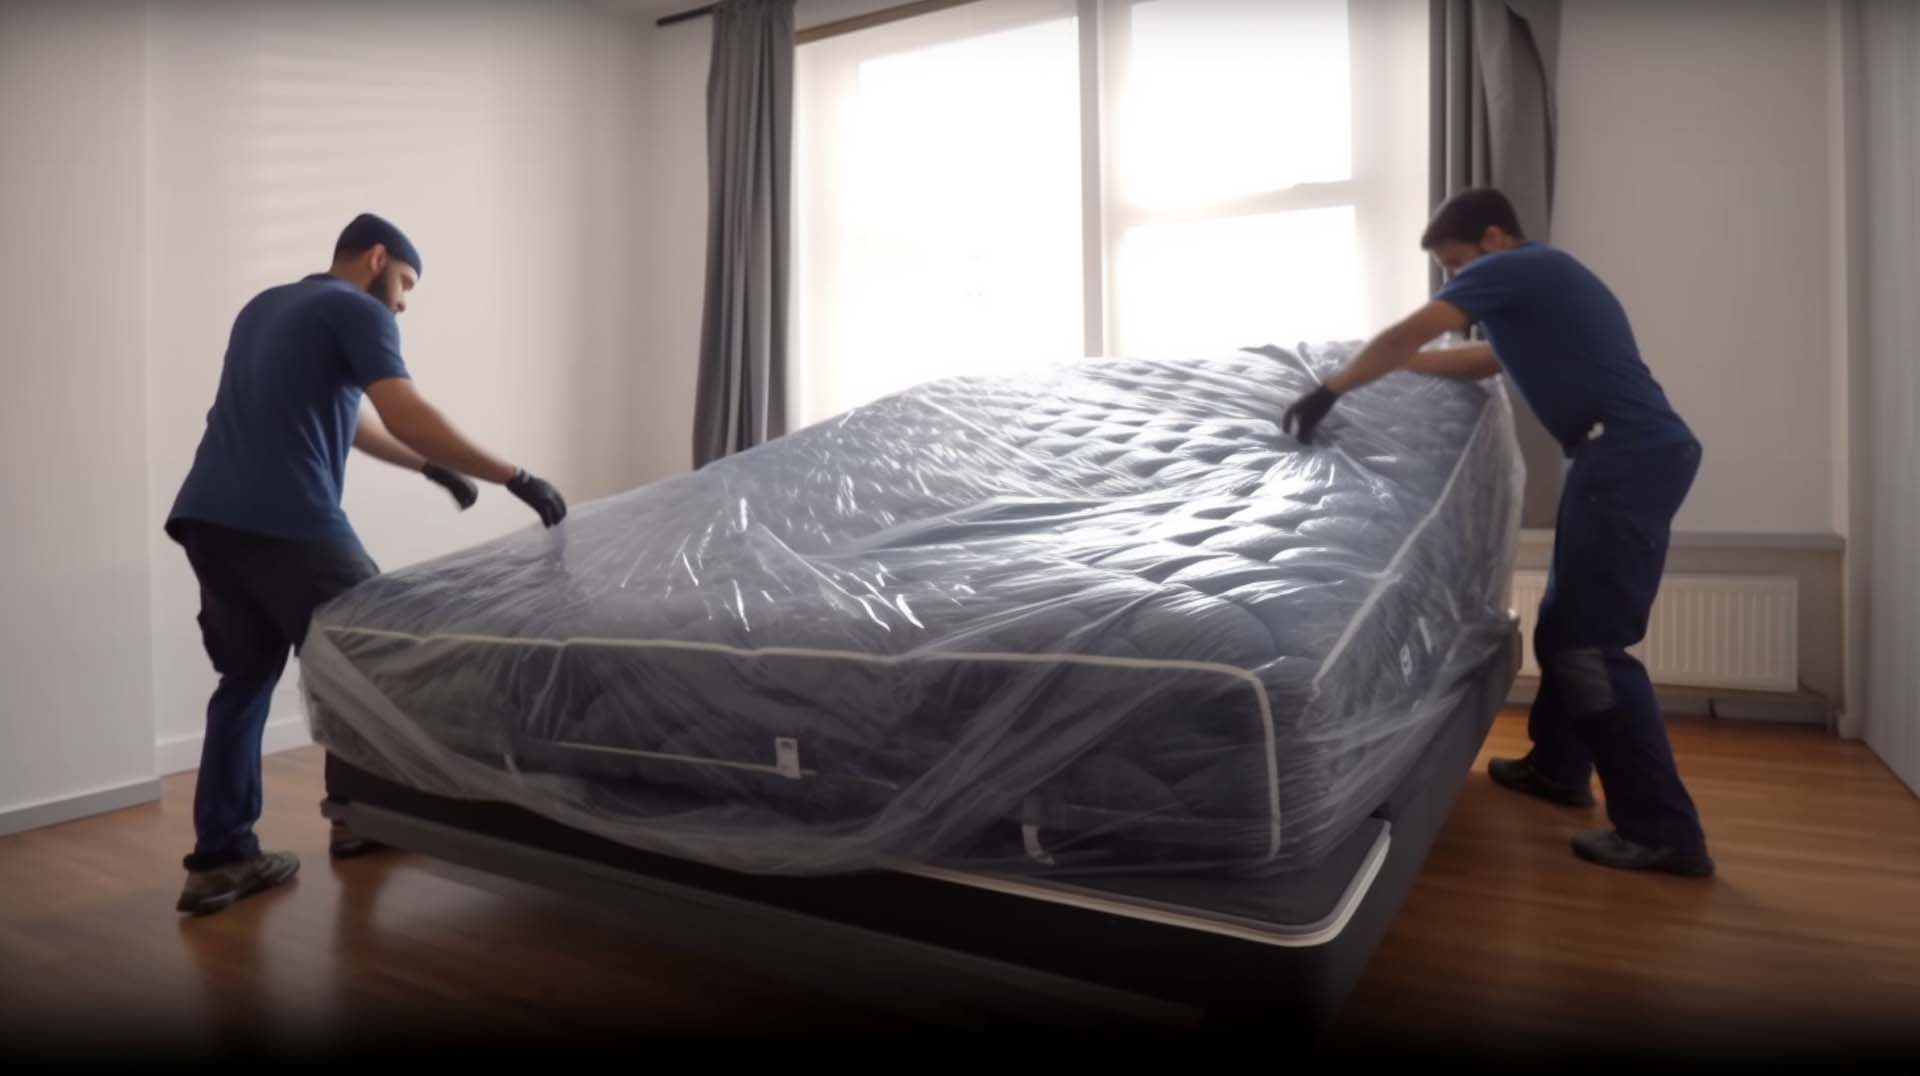 Mattress Removal in Whitehorse, YT